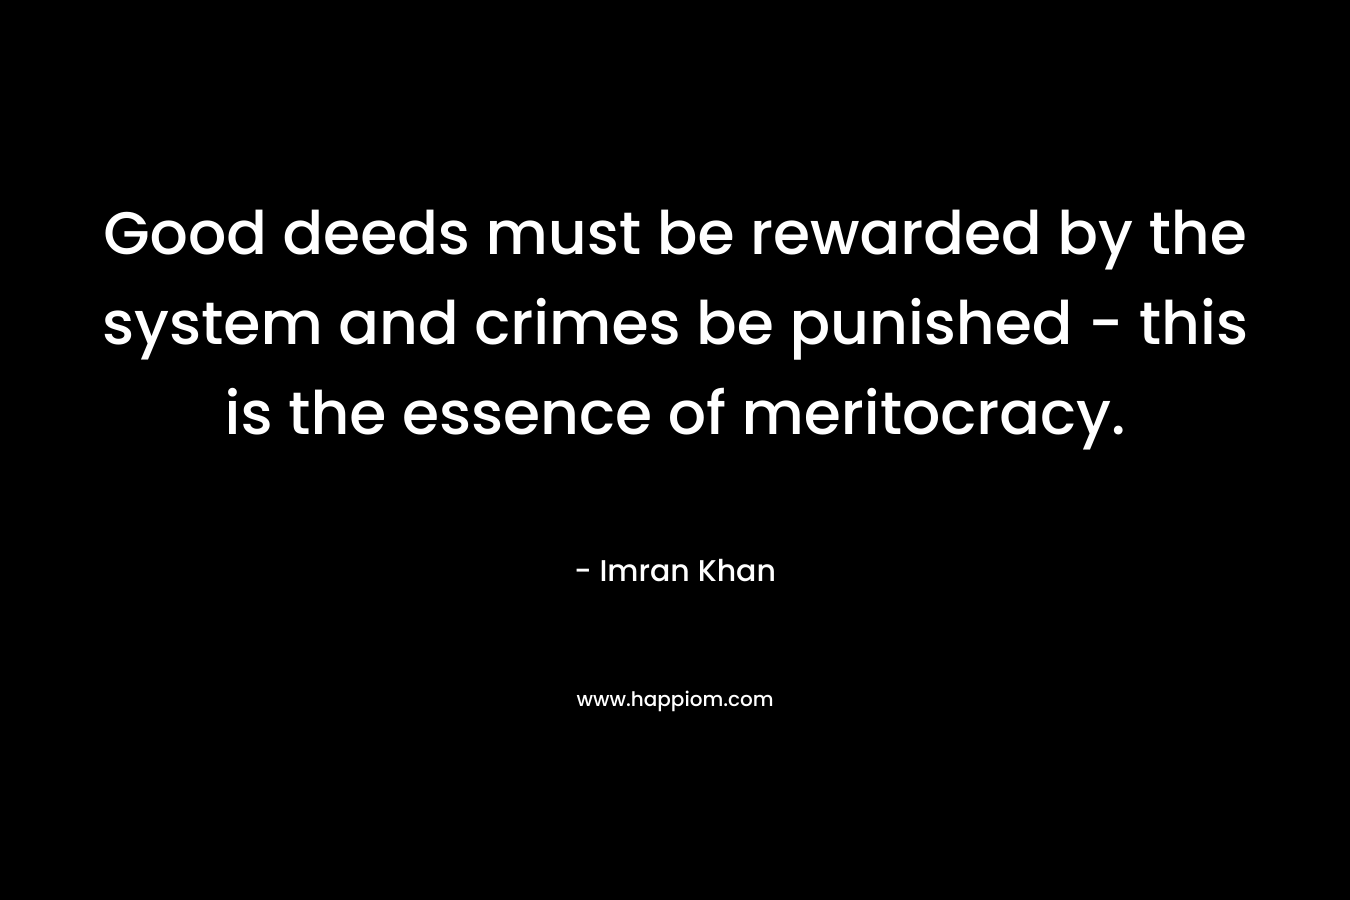 Good deeds must be rewarded by the system and crimes be punished – this is the essence of meritocracy. – Imran Khan